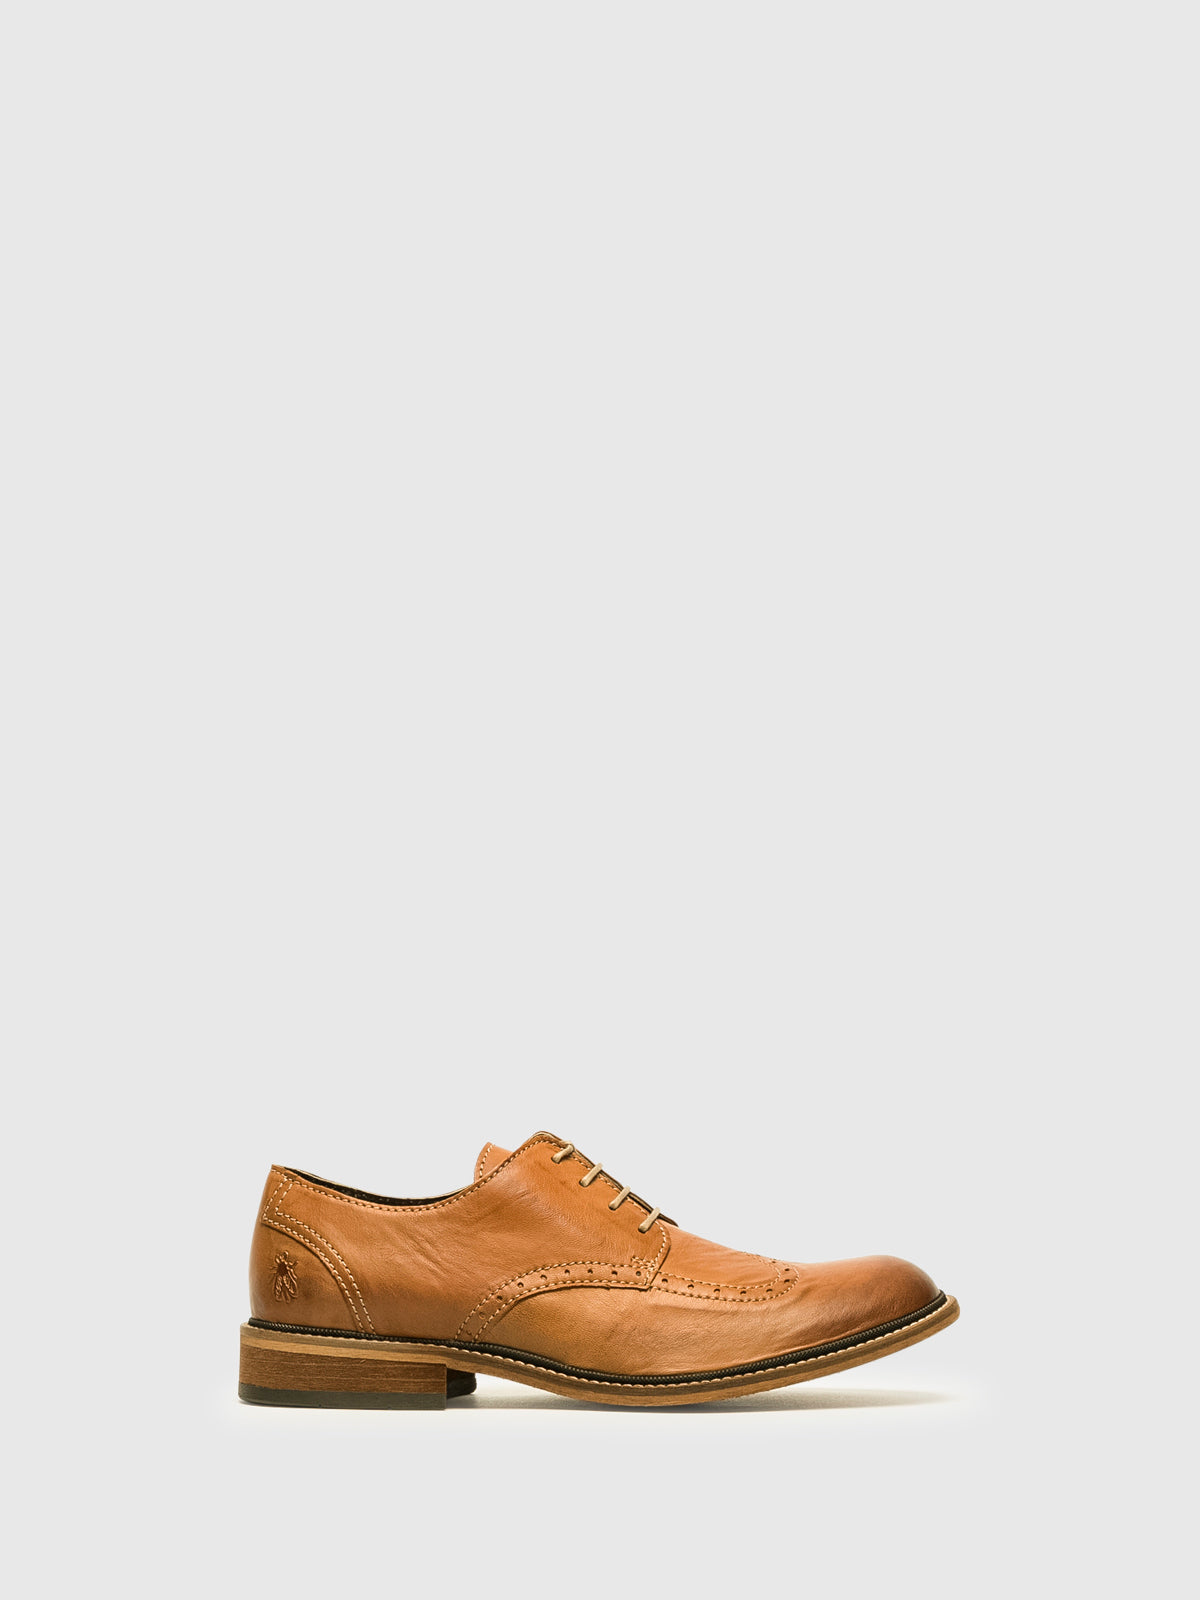 Fly London Chocolate Brown Derby Shoes